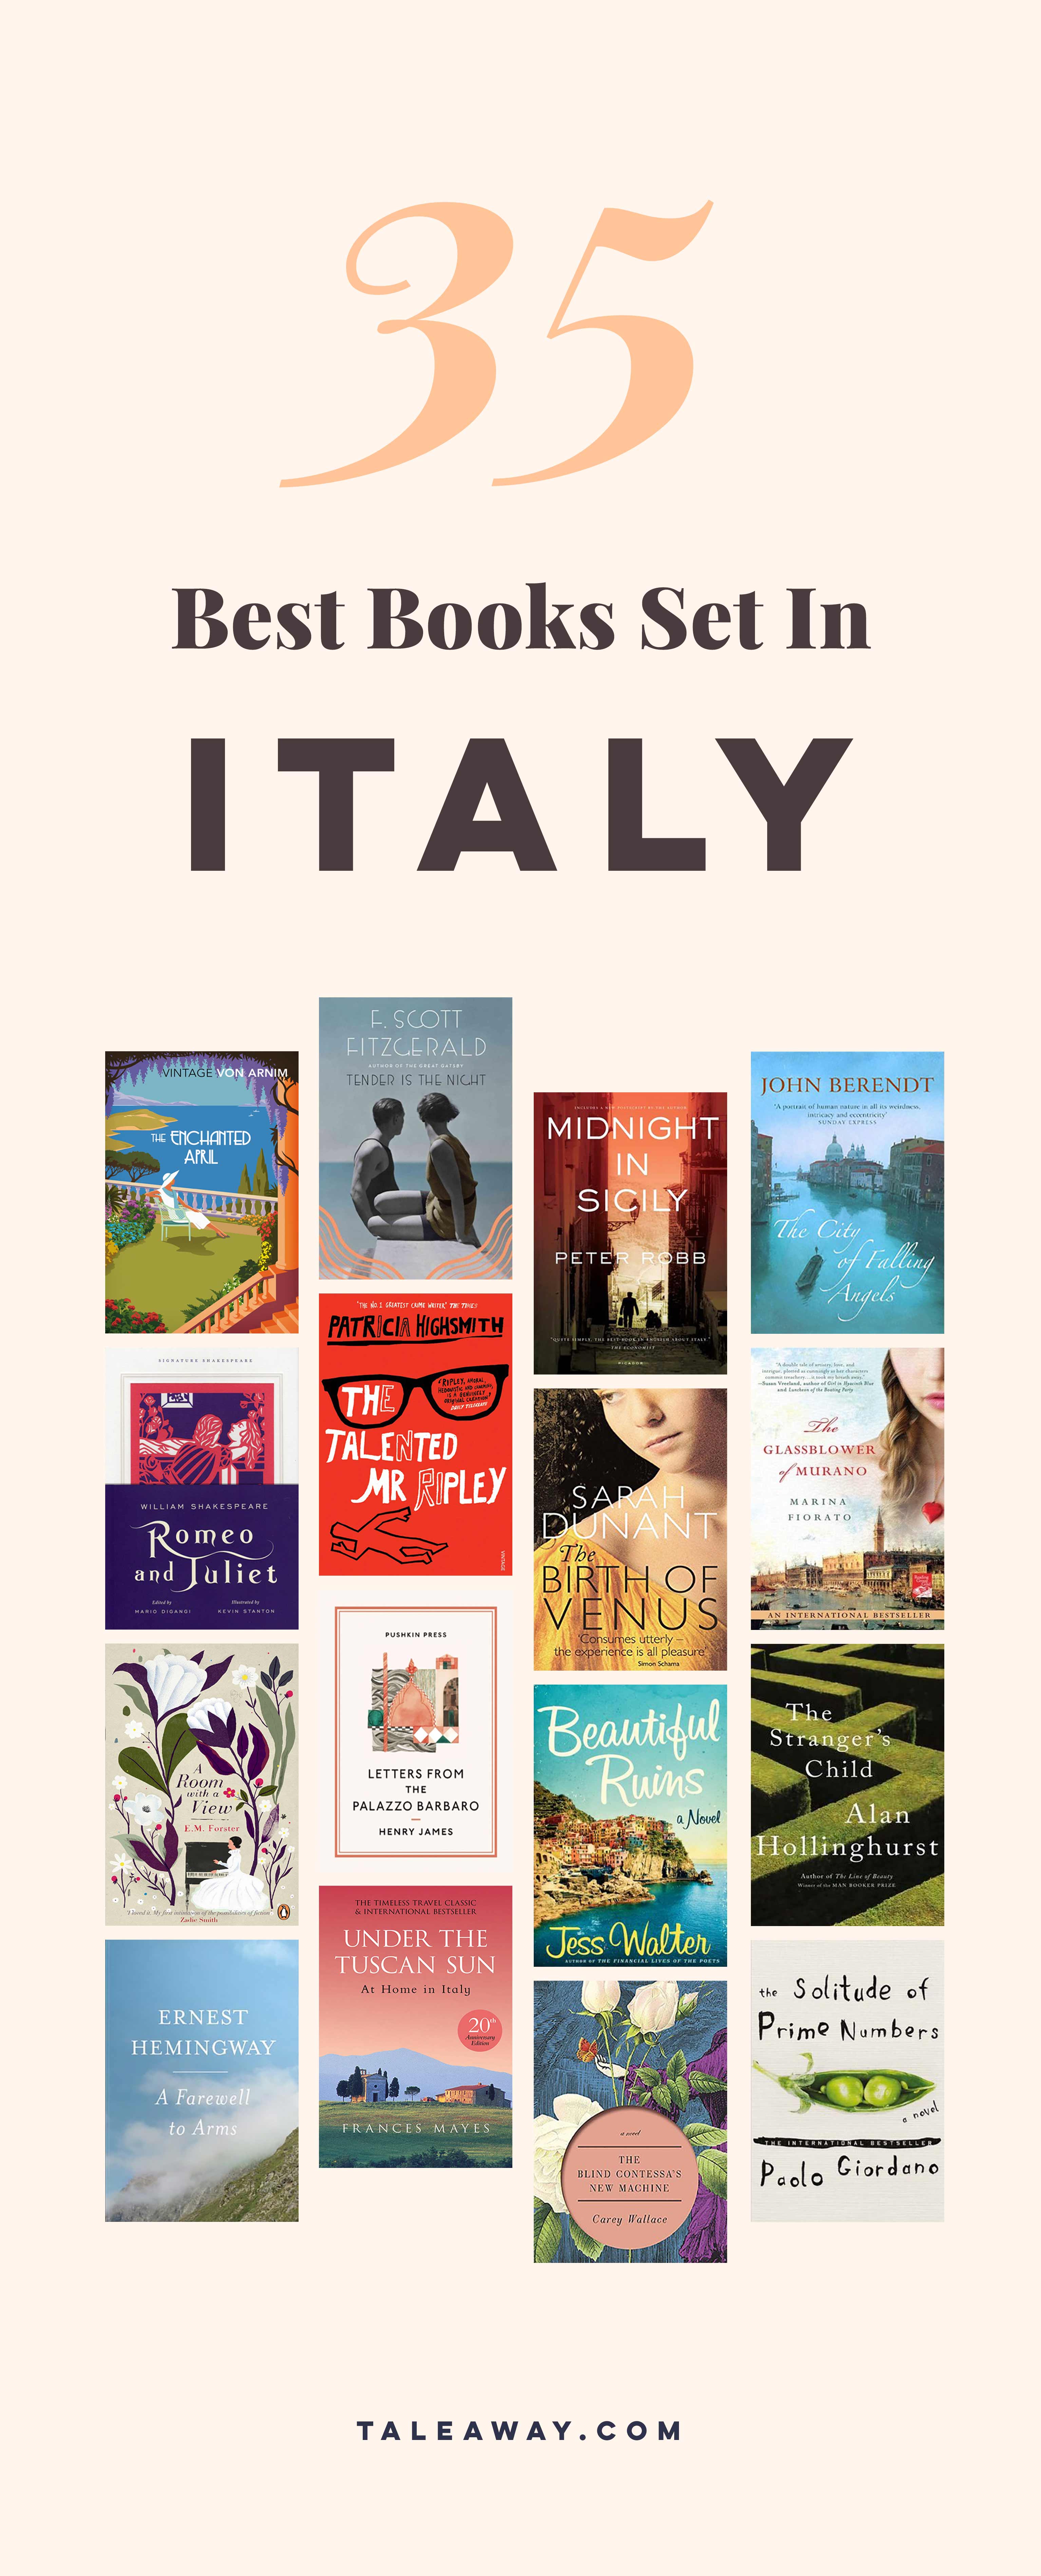 Books Set In Italy. Italian books that inspire travel, visit www.taleway.com for books set around the world. italian books, books about italy, italy inspiration, italy travel, novels set in italy, italian novels, books and travel, travel reads, reading list, books around the world, books to read, italy, books set in different countries